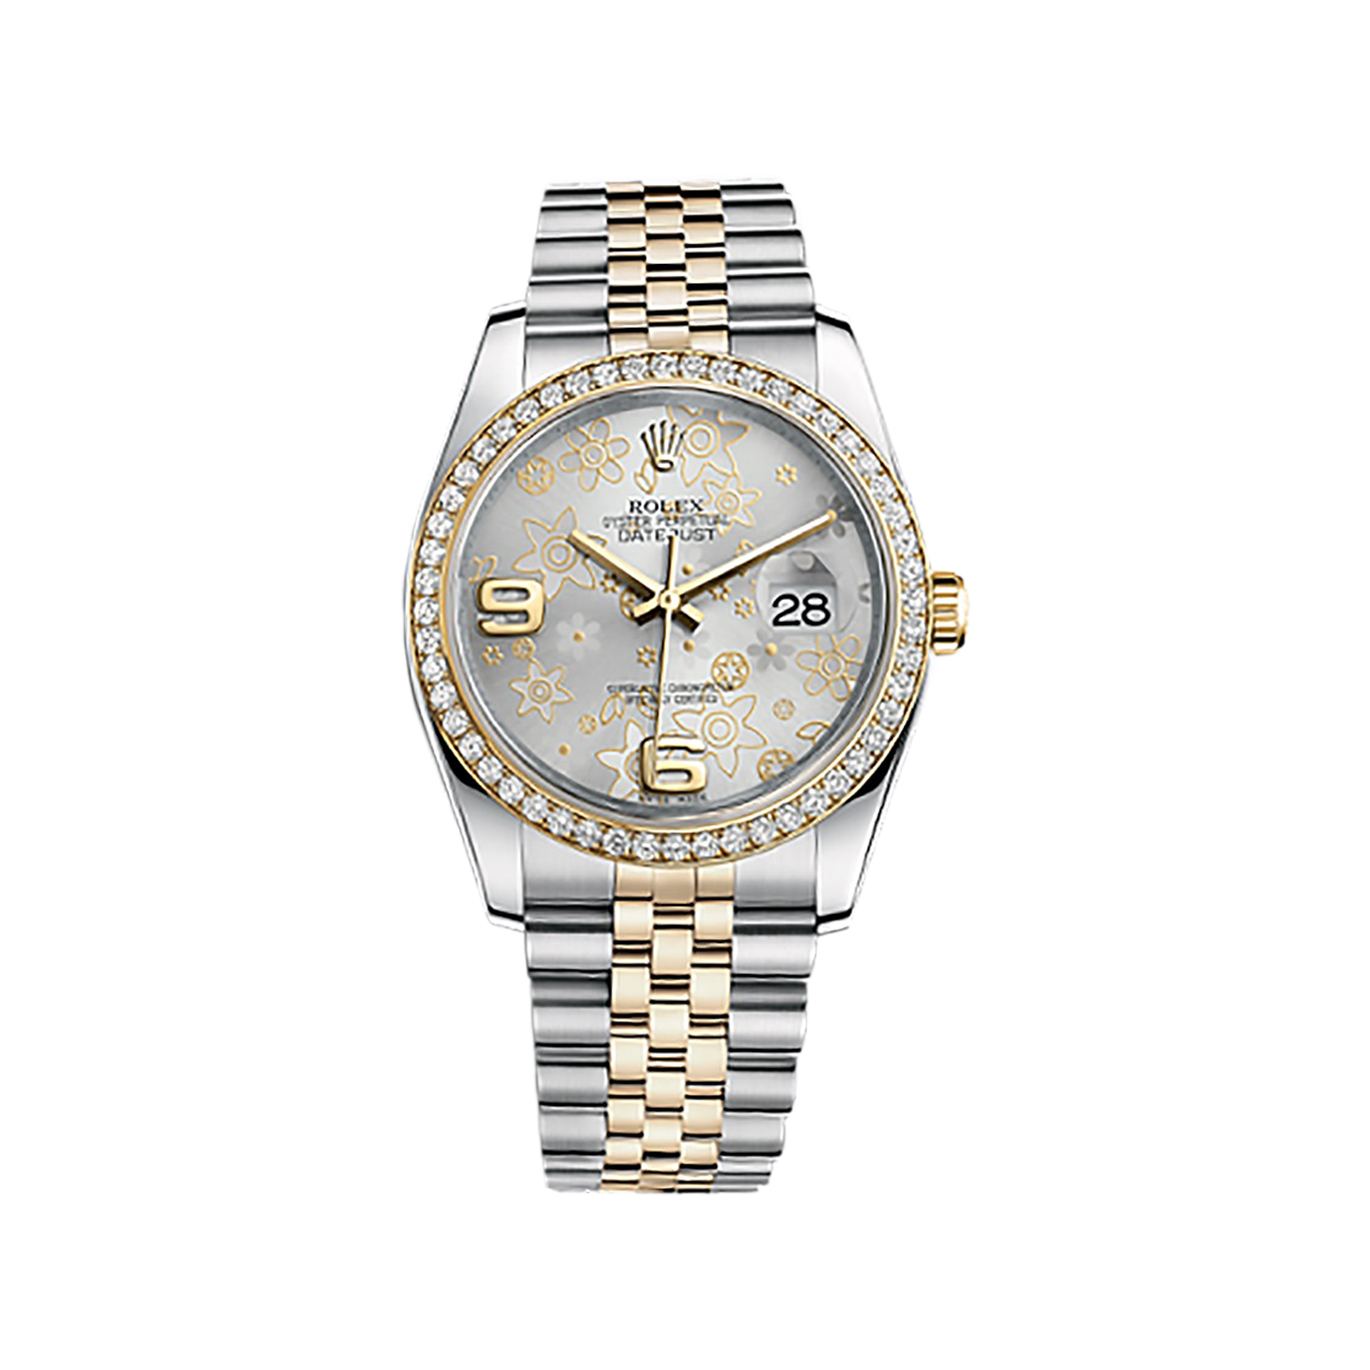 Datejust 36 116243 Gold & Stainless Steel Watch (Silver Floral Motif)